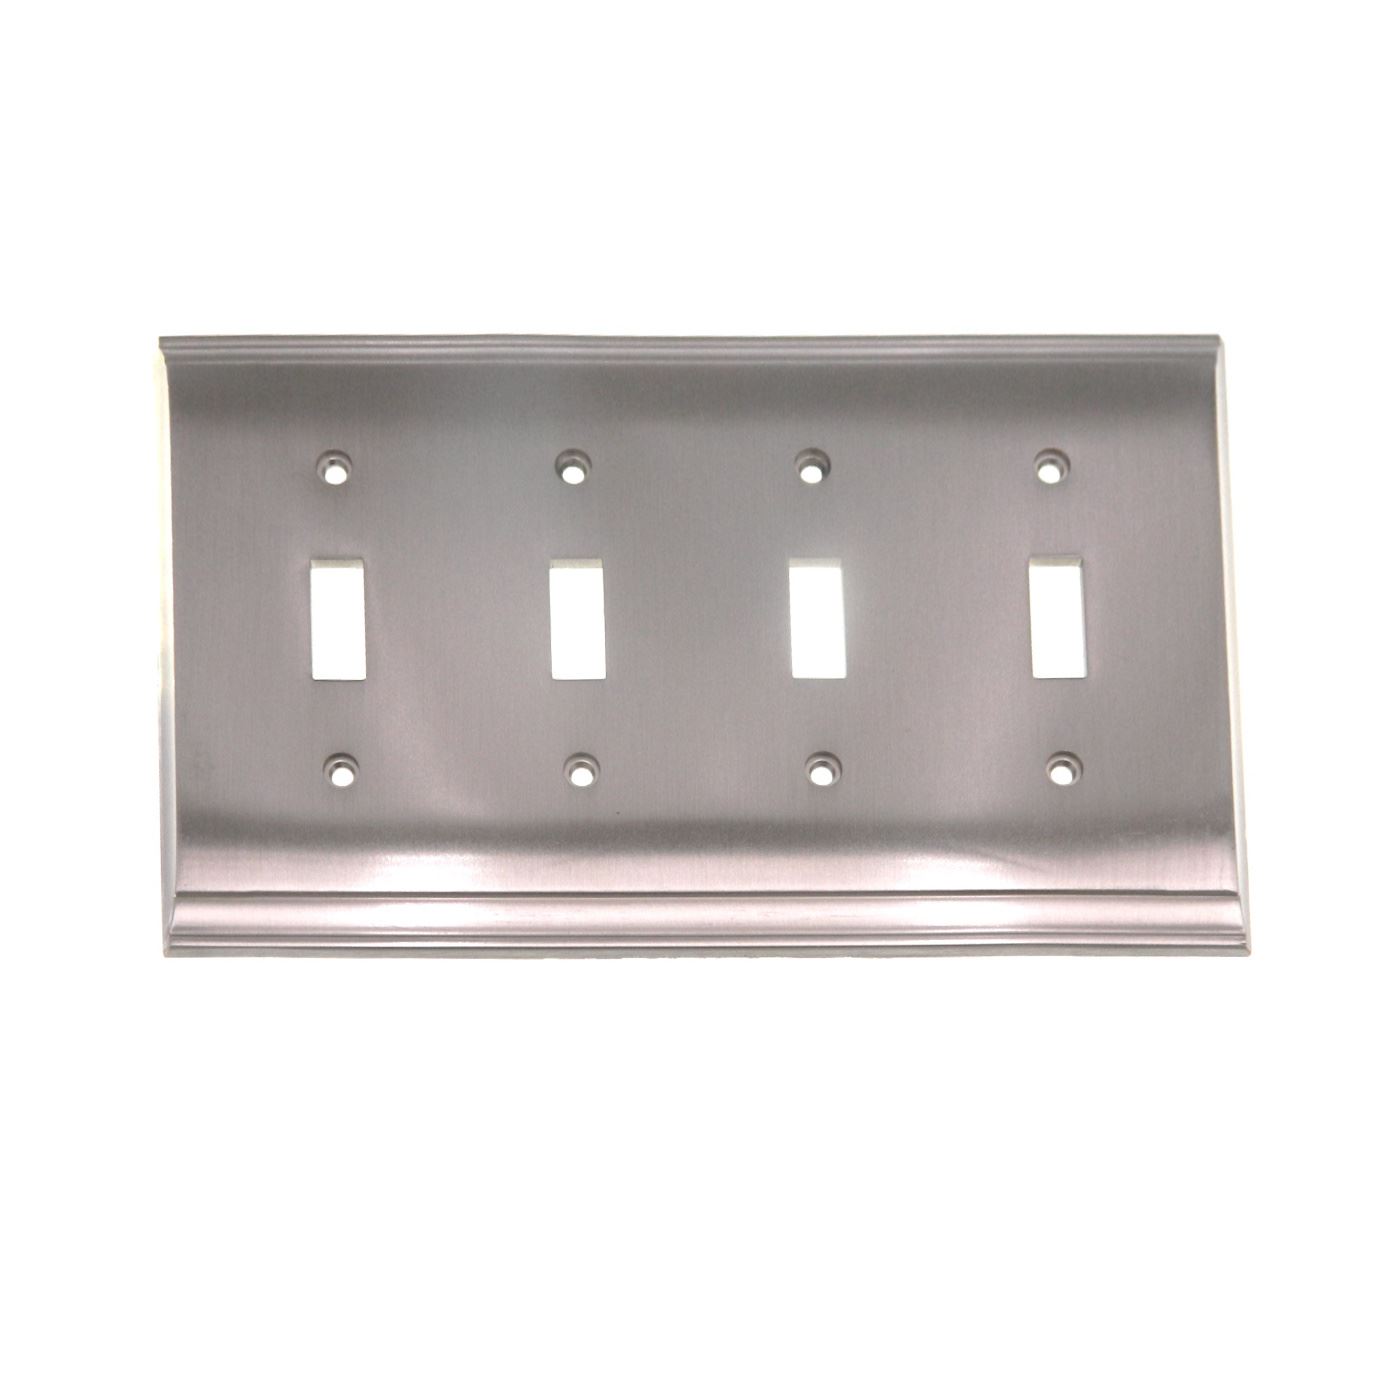 Amerock Candler Satin Nickel 4 Toggle Light Switch Wall Plate BP36503G10